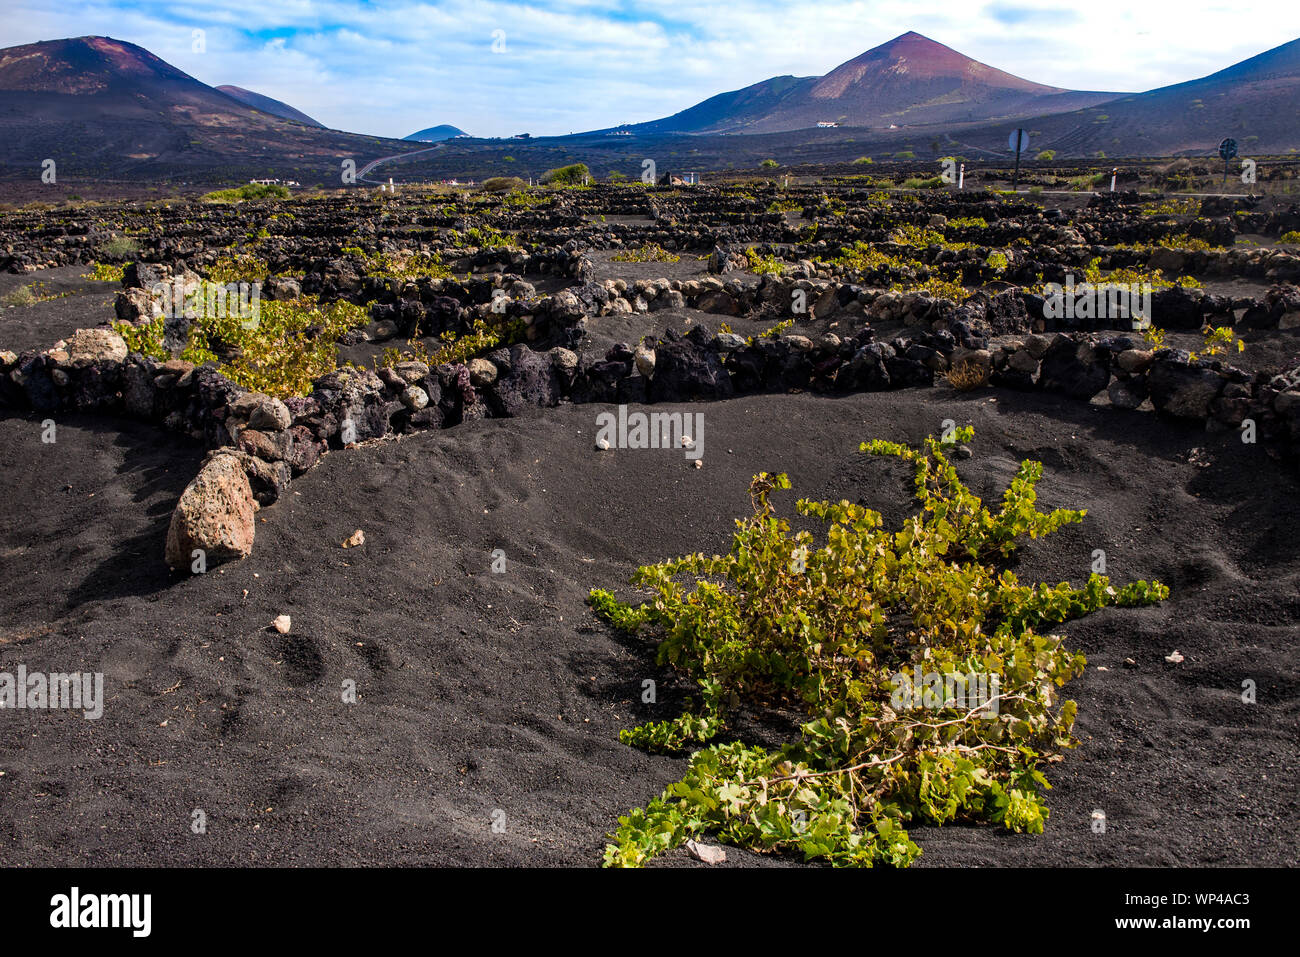 Semicircular black volcanic rock walls  protecting the vulnerable grape vines from the dry winds of Lanzarote, Canary Islands, Spain.  Volcanoes in th Stock Photo